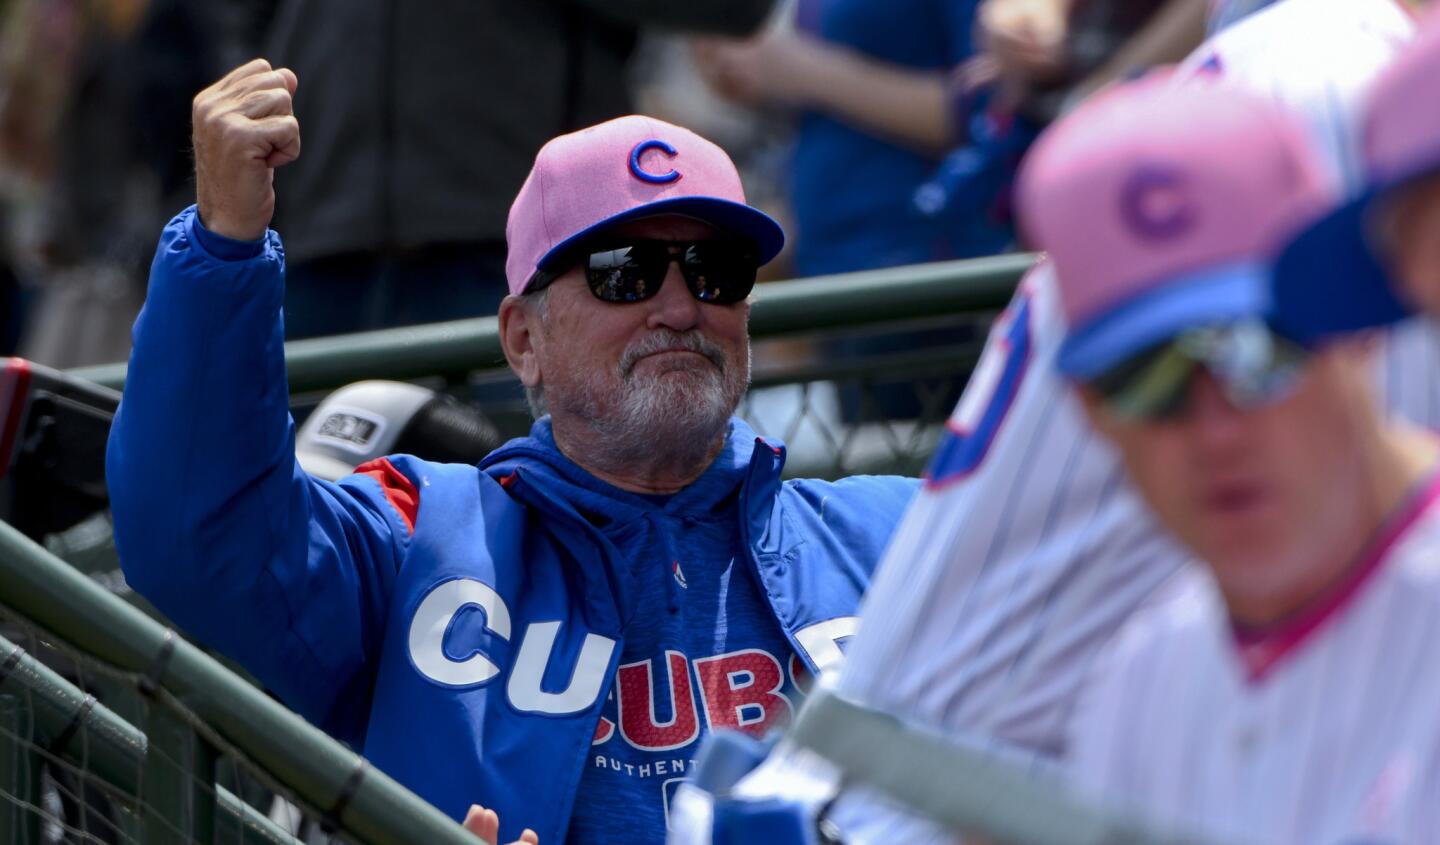 Cubs manager Joe Maddon (70) gestures before a game against the White Sox on Sunday, May 13, 2018, at Wrigley Field.